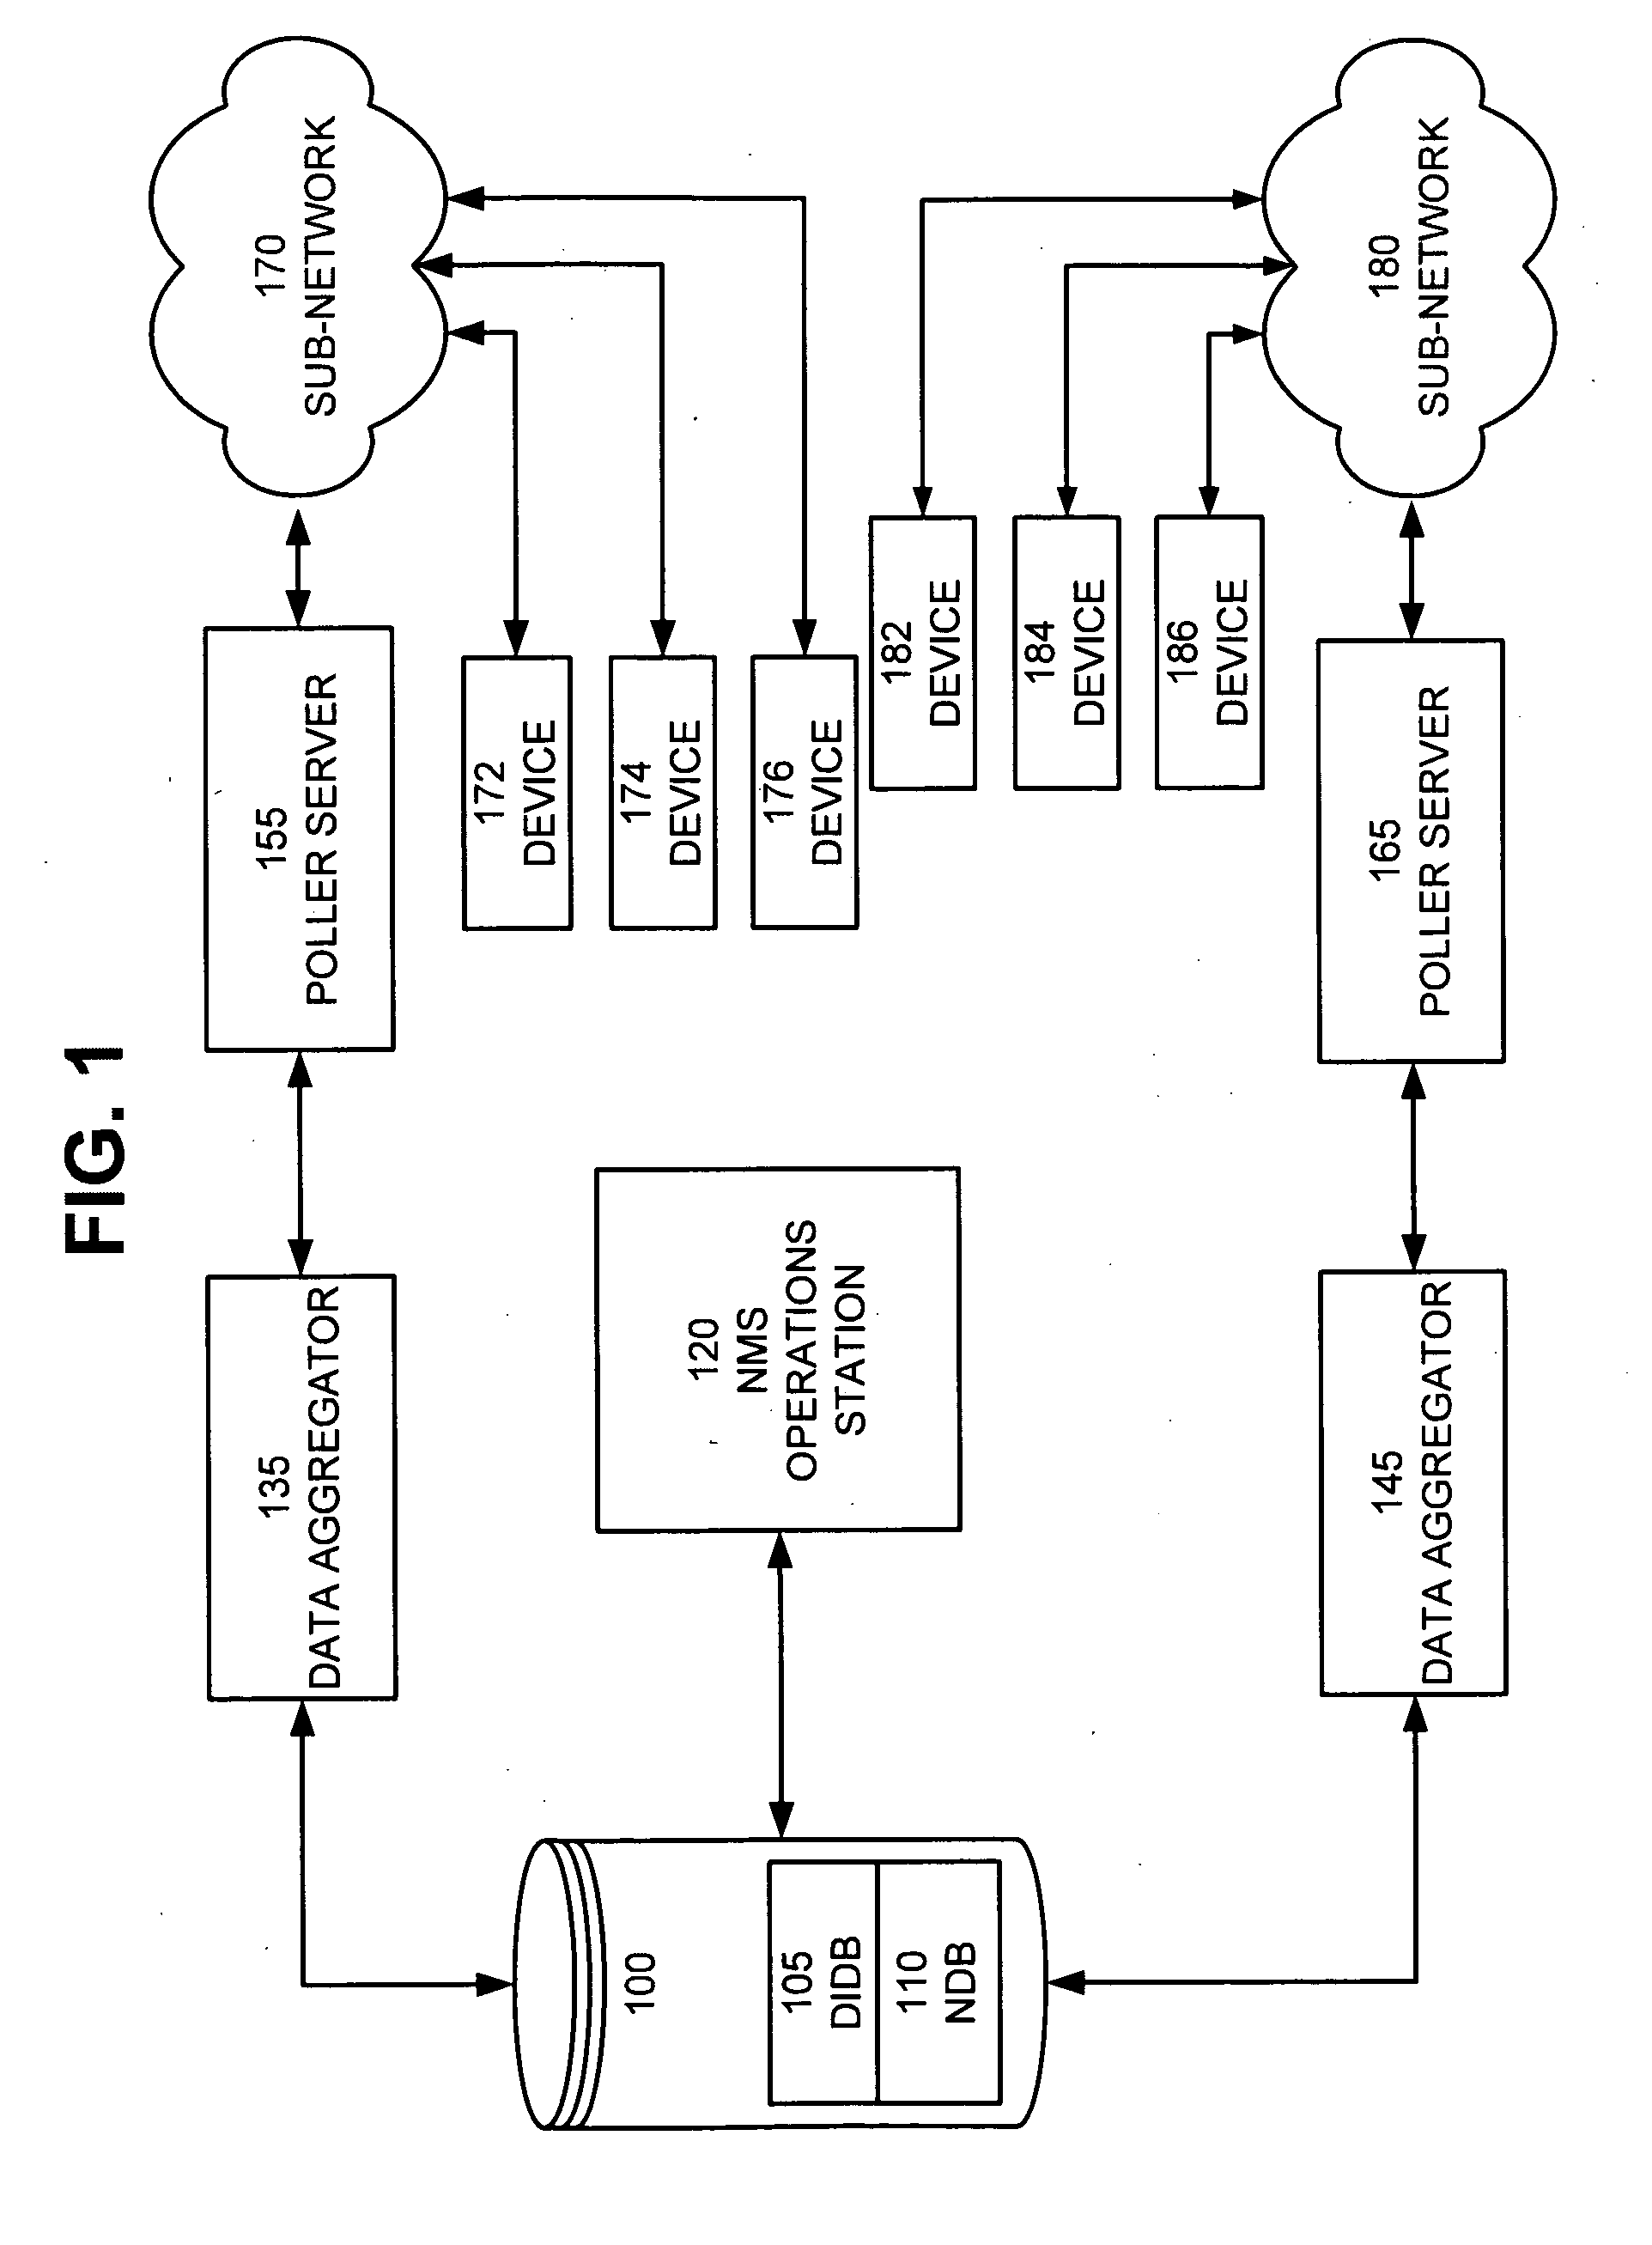 System and Method for Synchronizing the Configuration of Distributed Network Management Applications